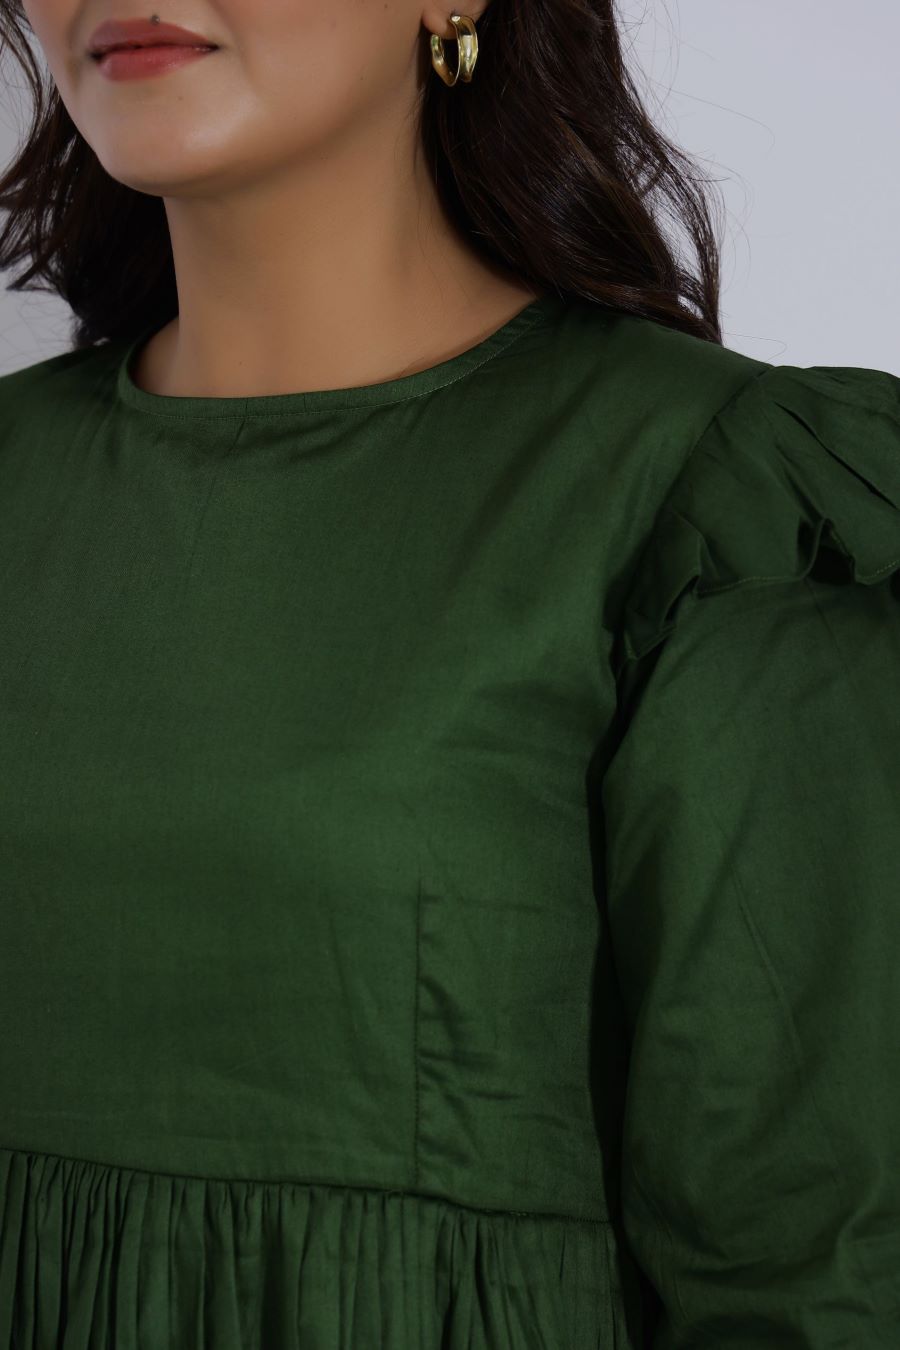 Dark Green Dress With Sleeves For Women